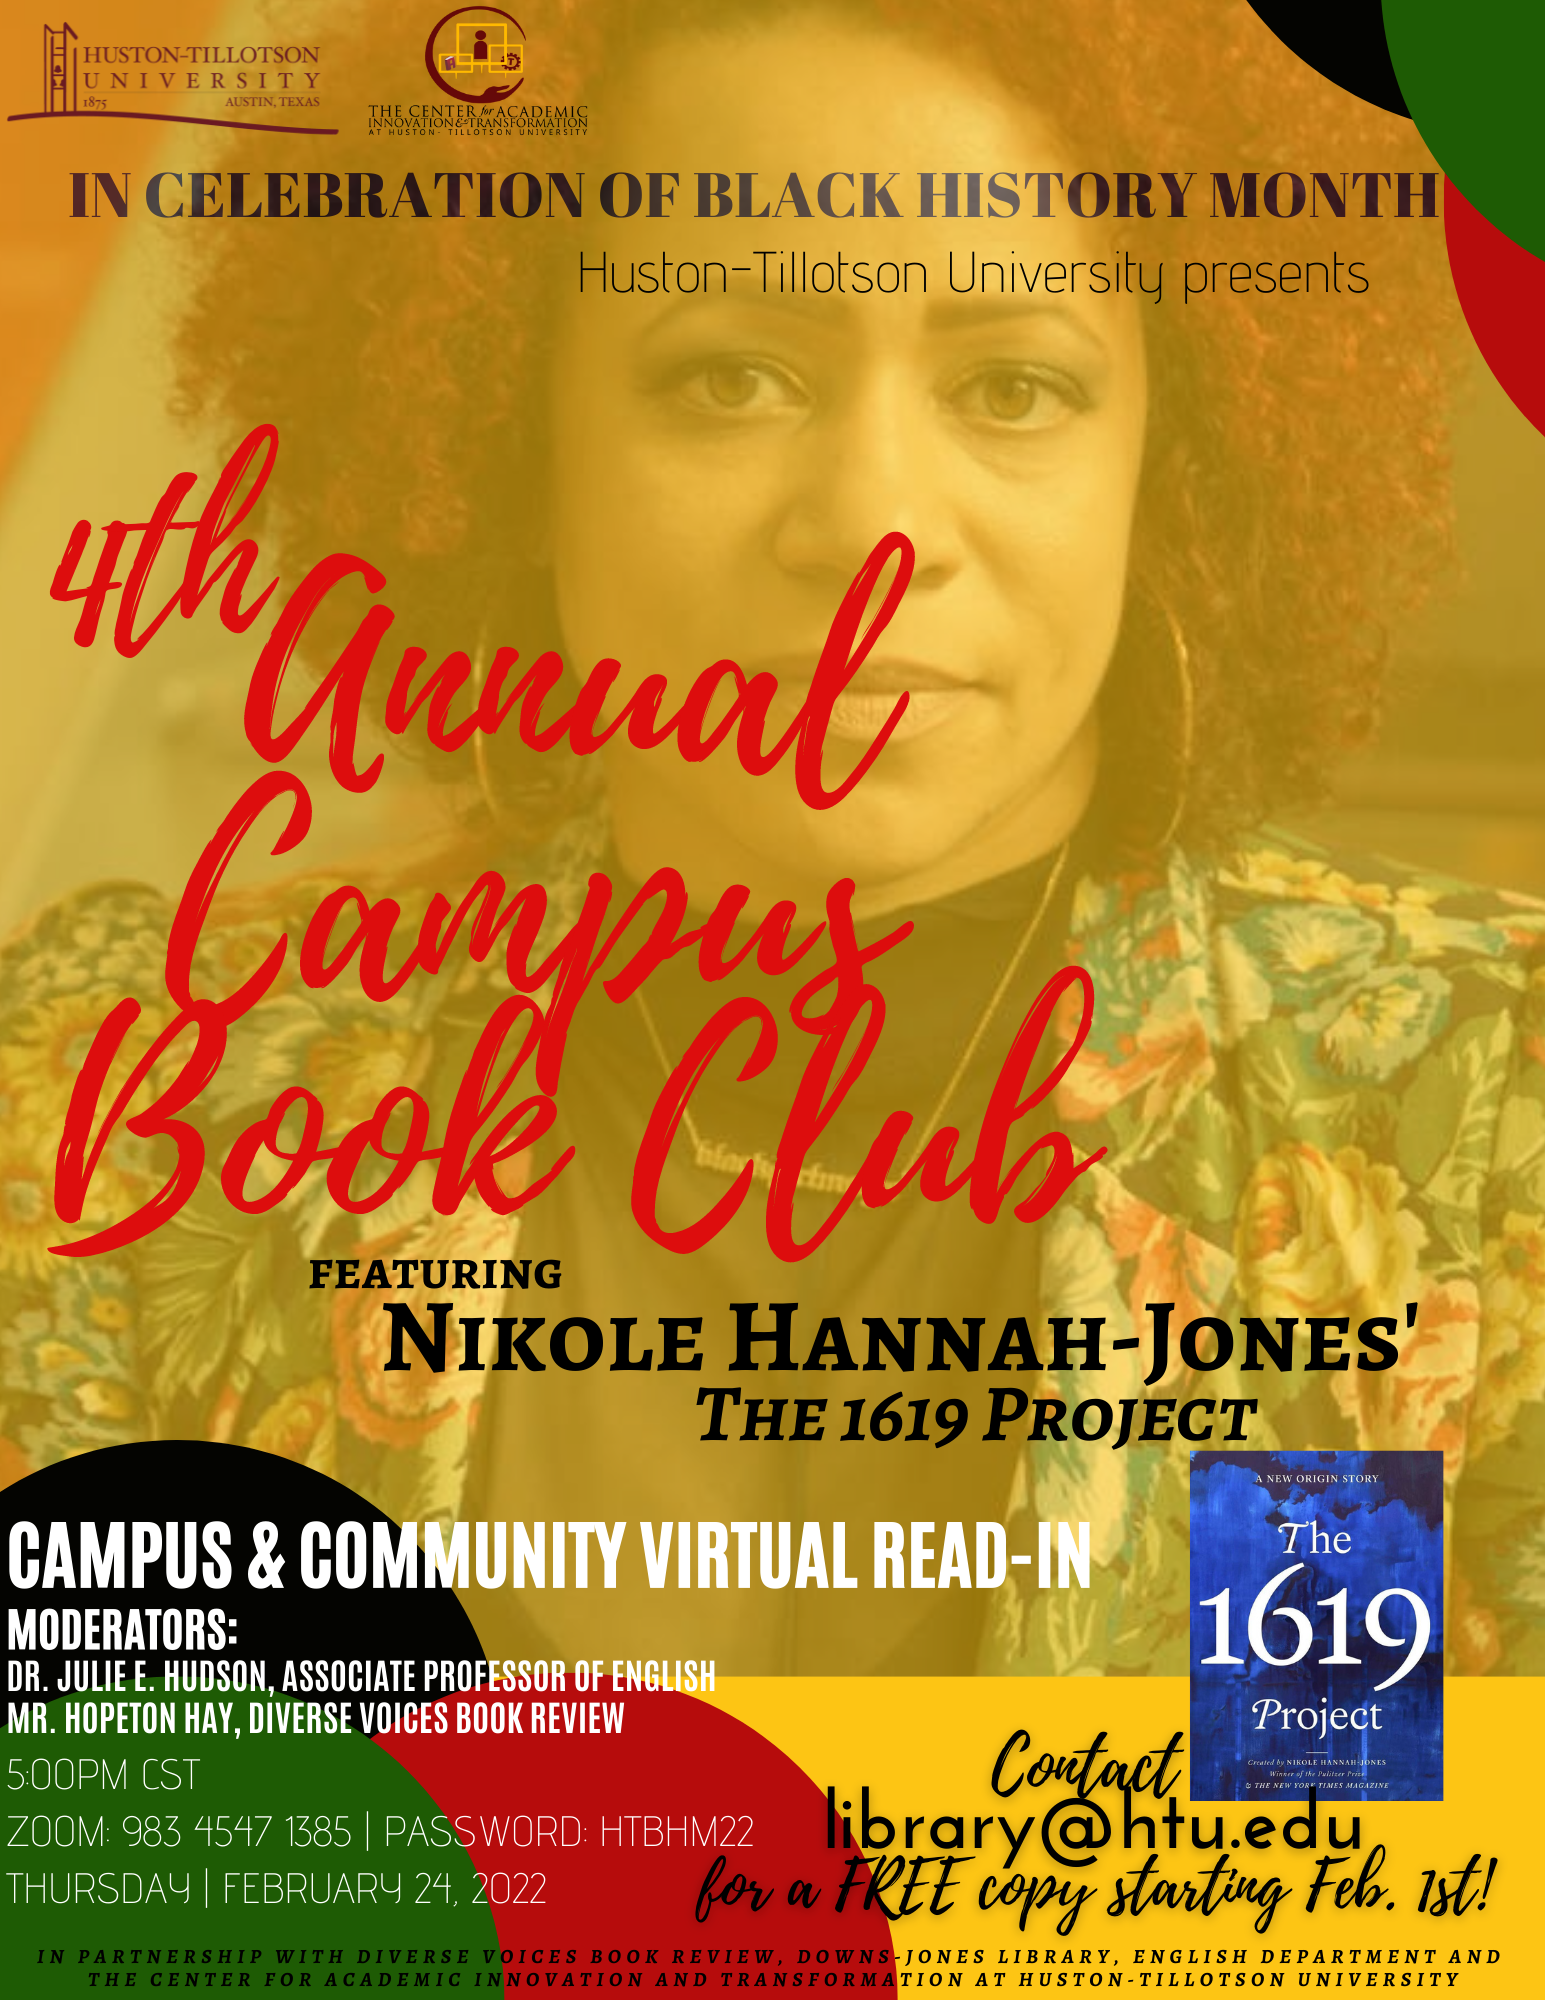 Poster for the Fourth Annual Black History Month Book Club